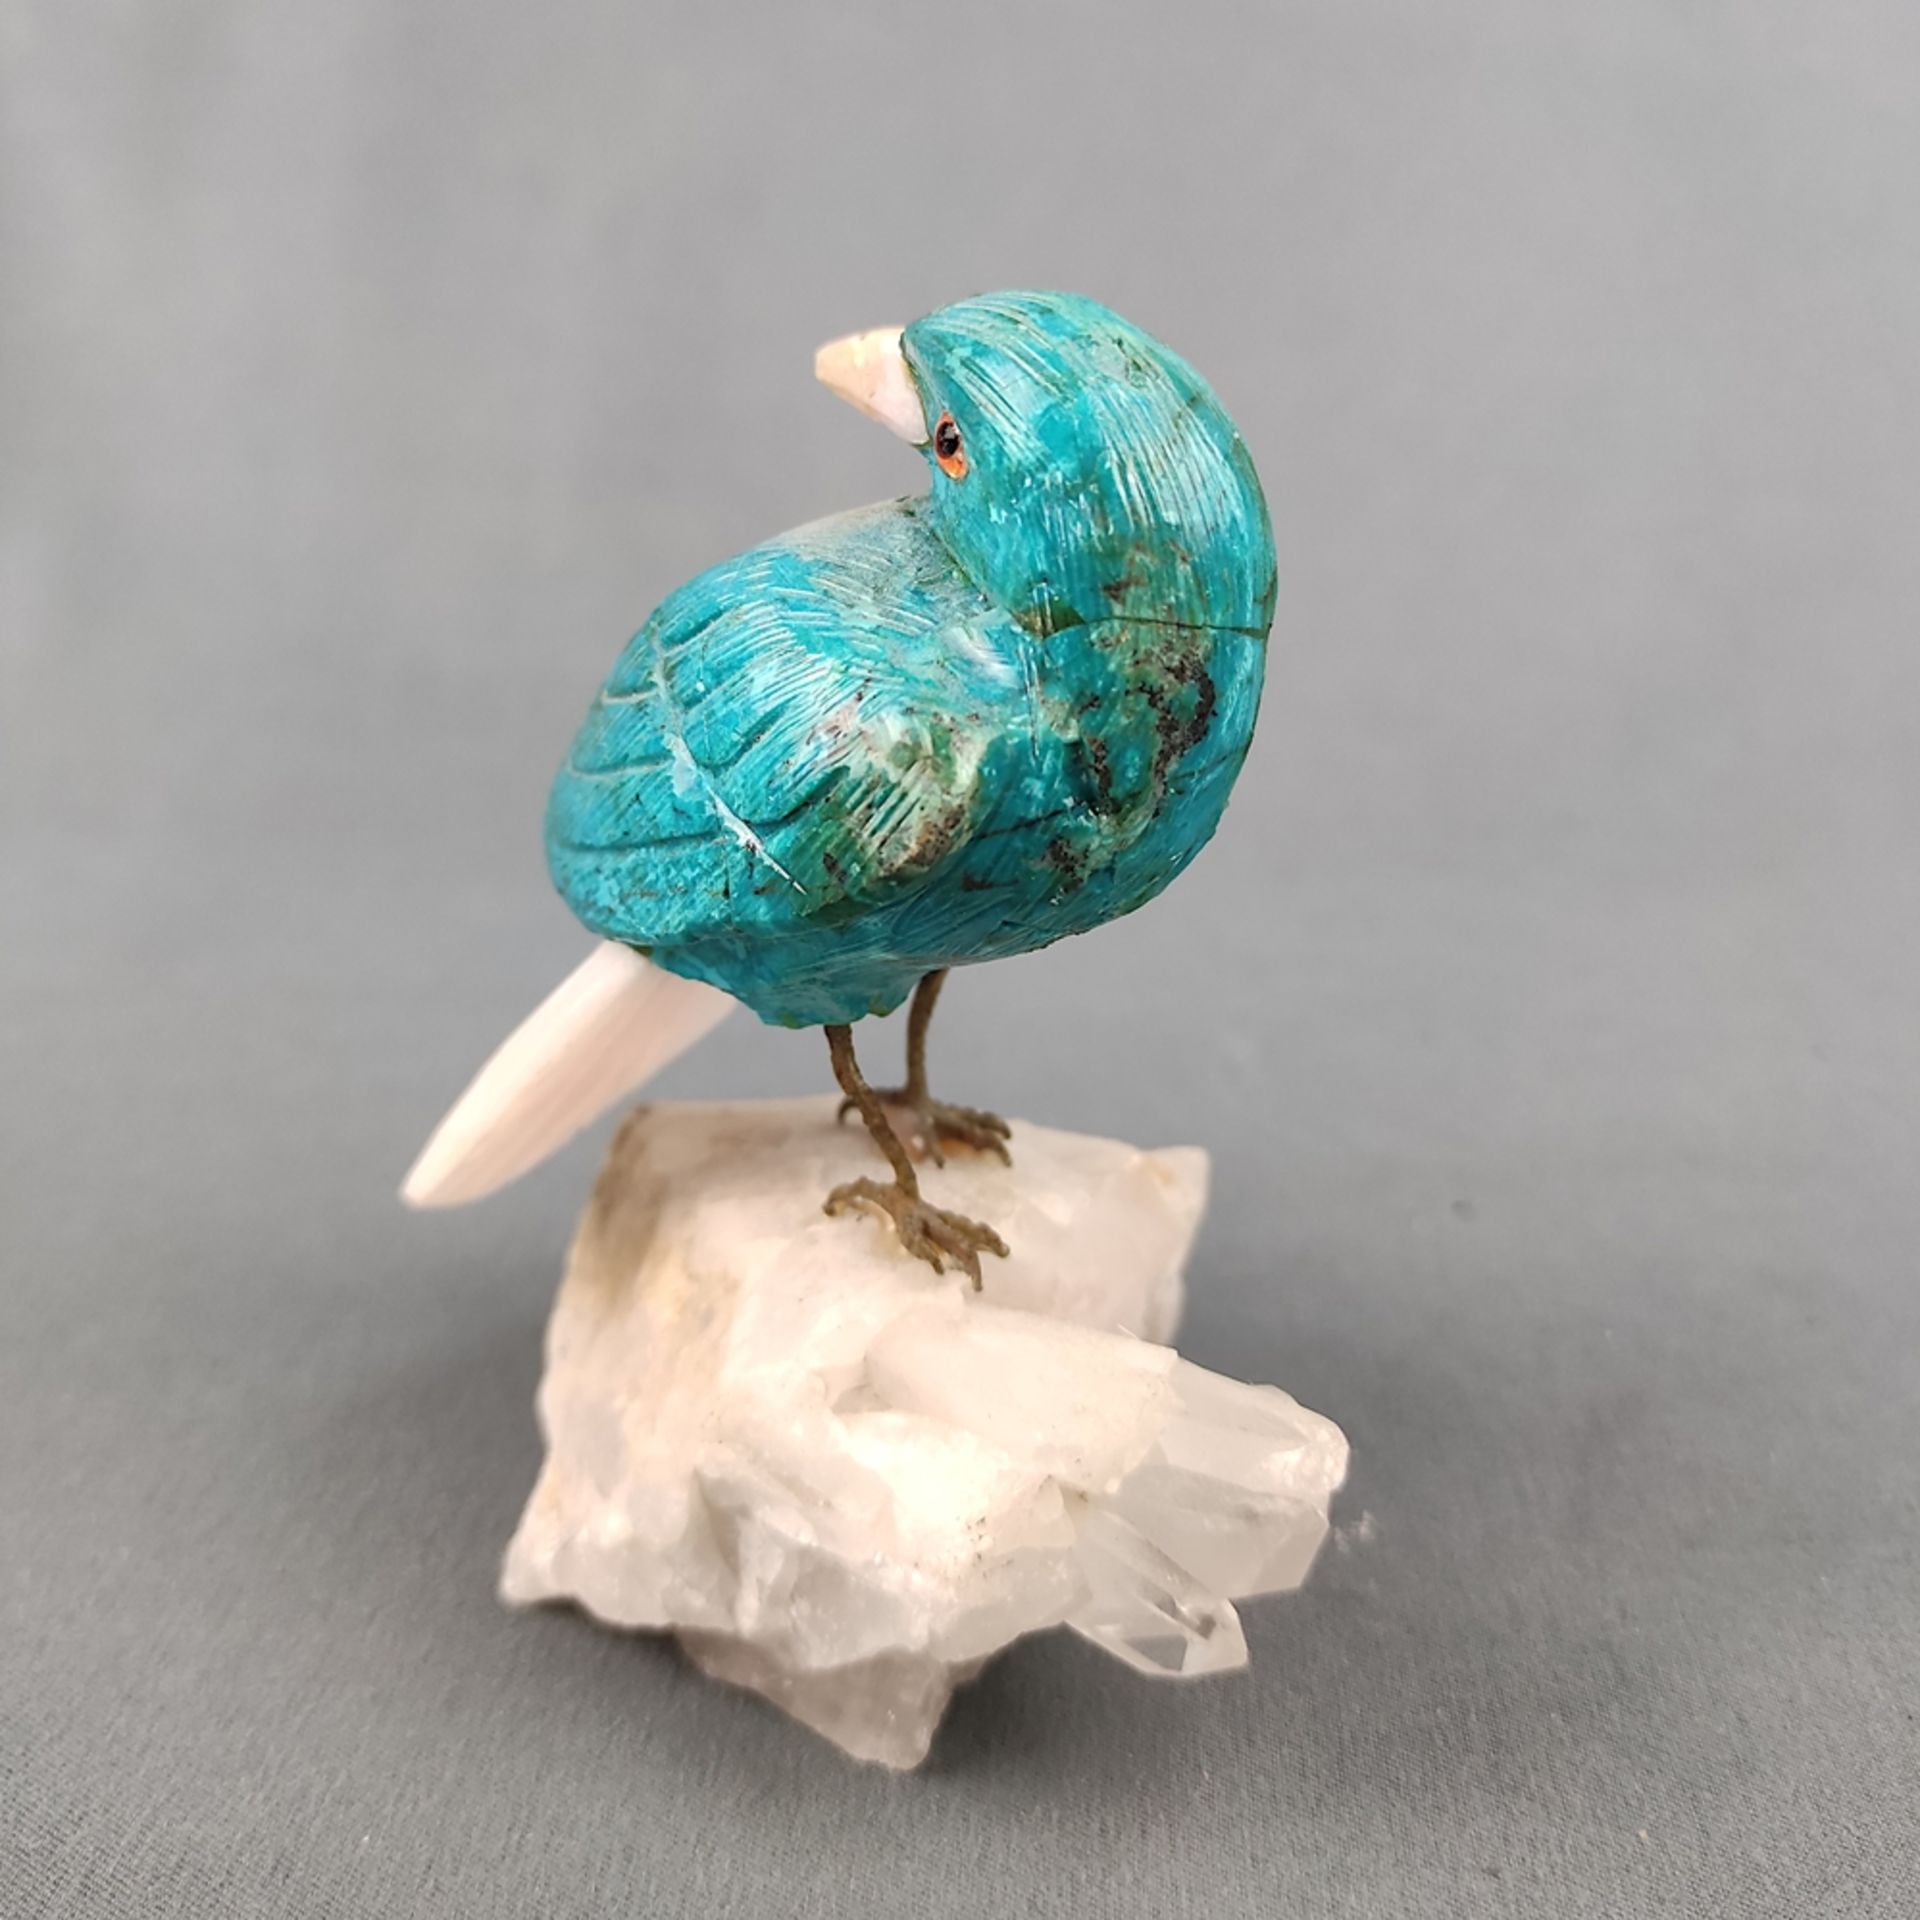 3 birds made of semi-precious stones, consisting of "toucan" sitting on rock crystal, height 6.5cm, - Image 5 of 7